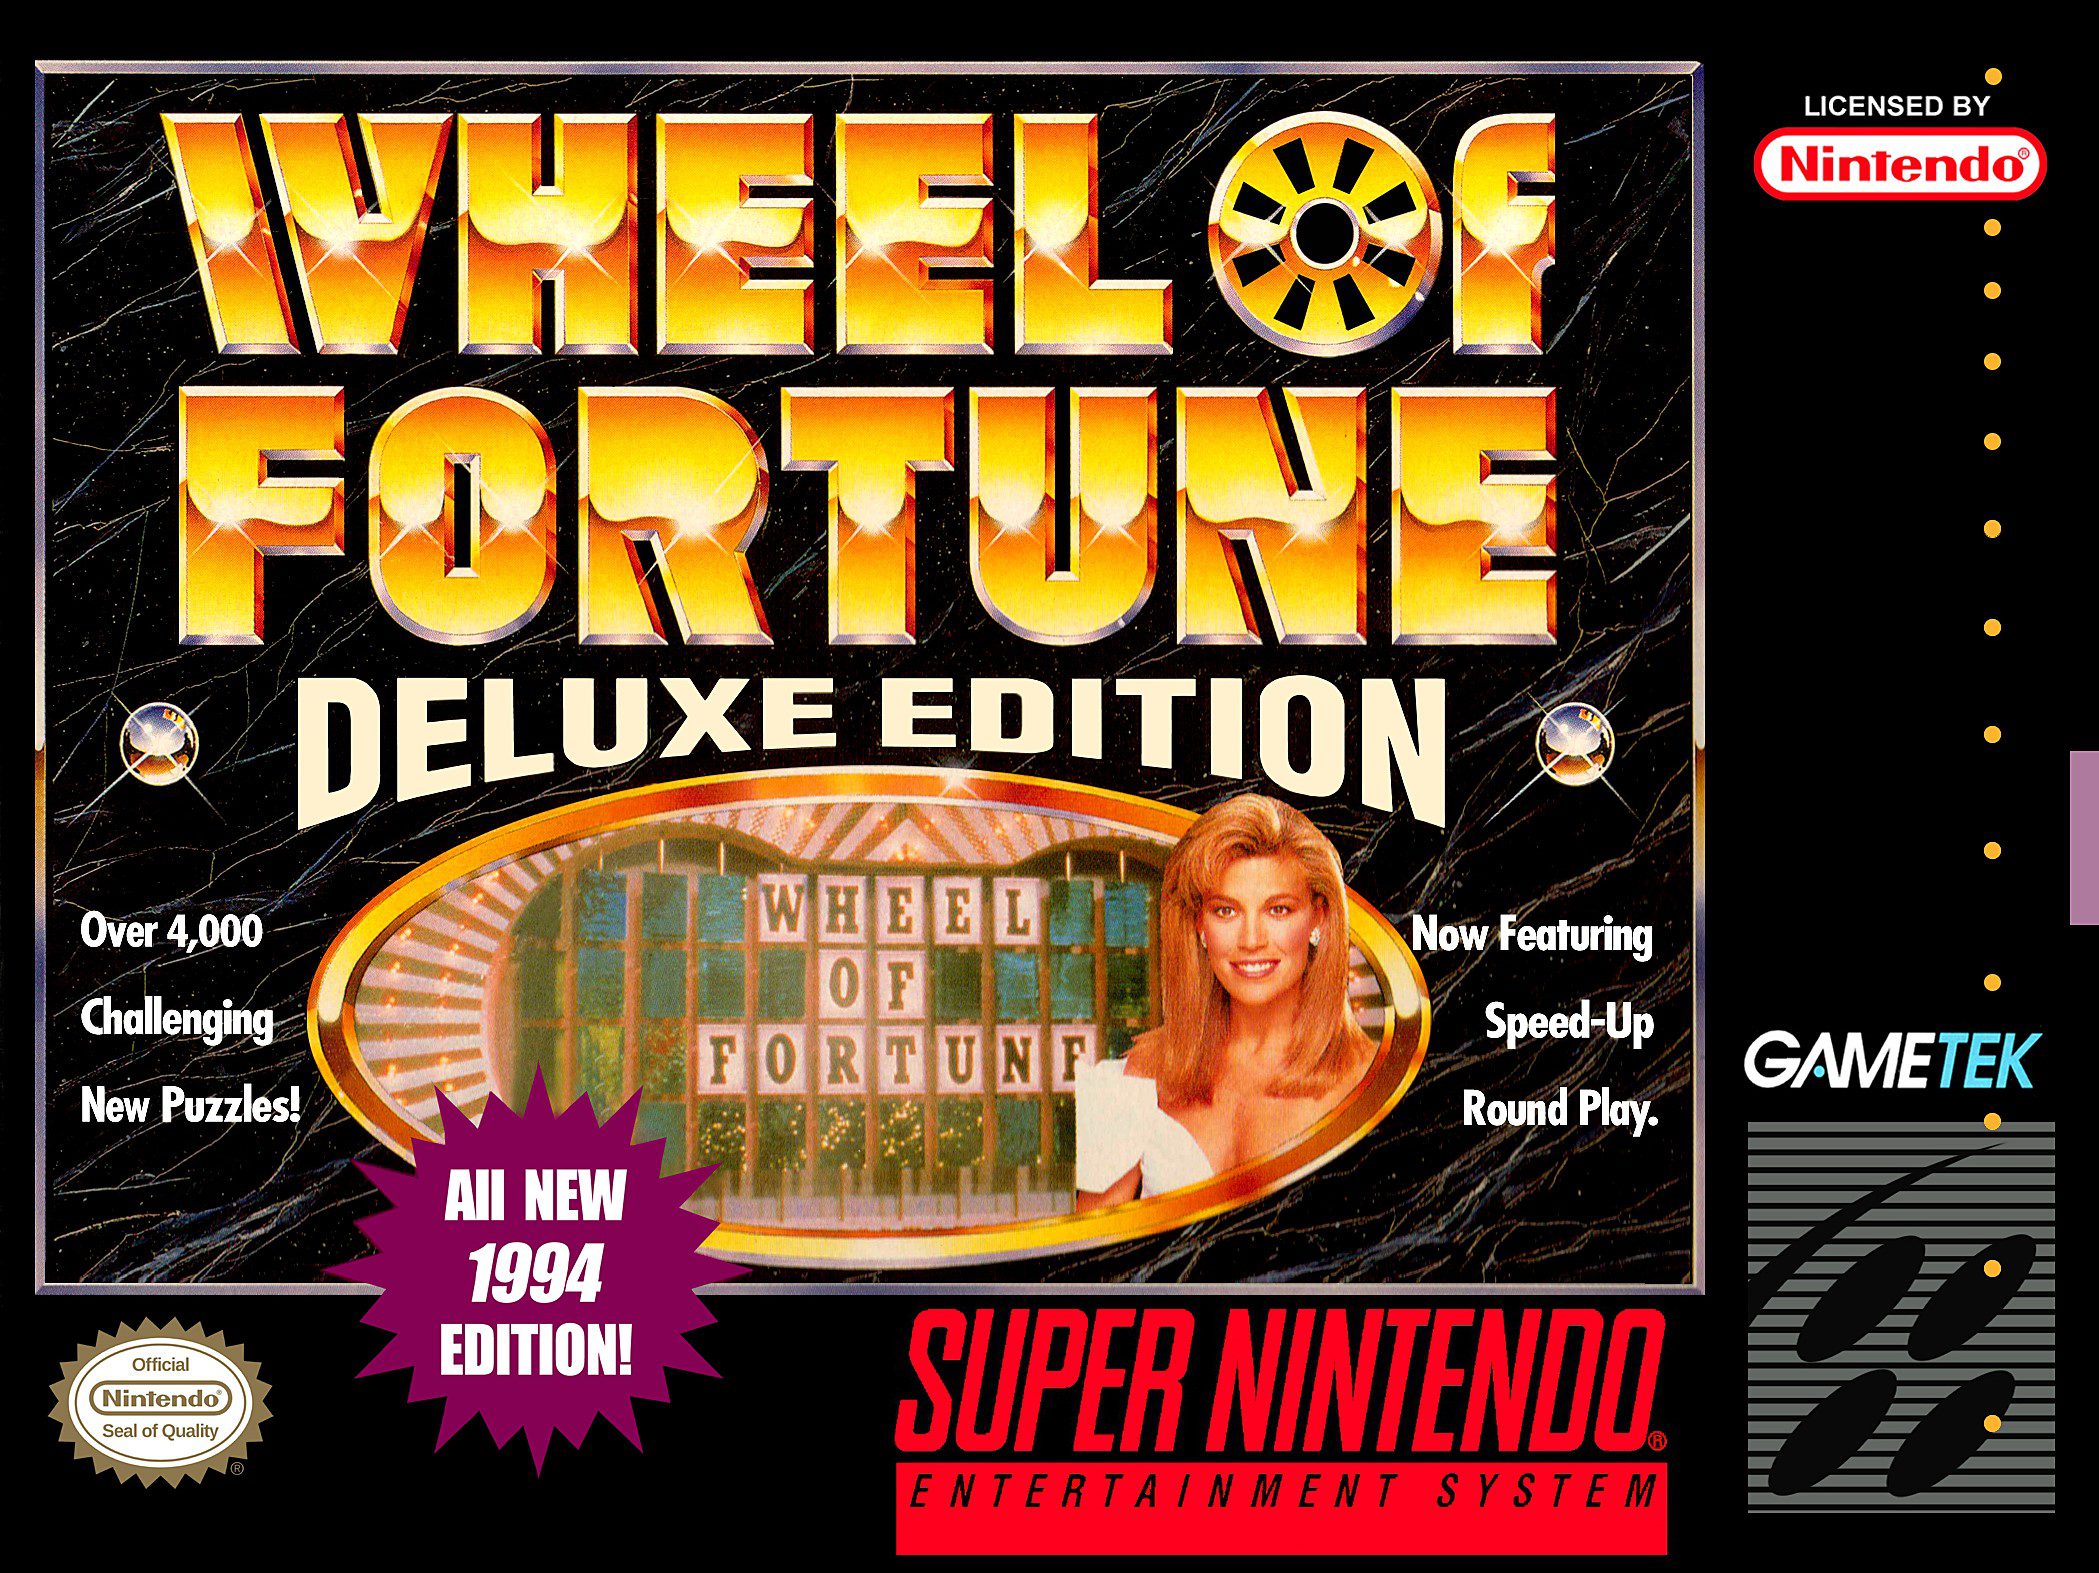 Wheel of Fortune (Deluxe Edition) for Super Nintendo Entertainment System (SNES)